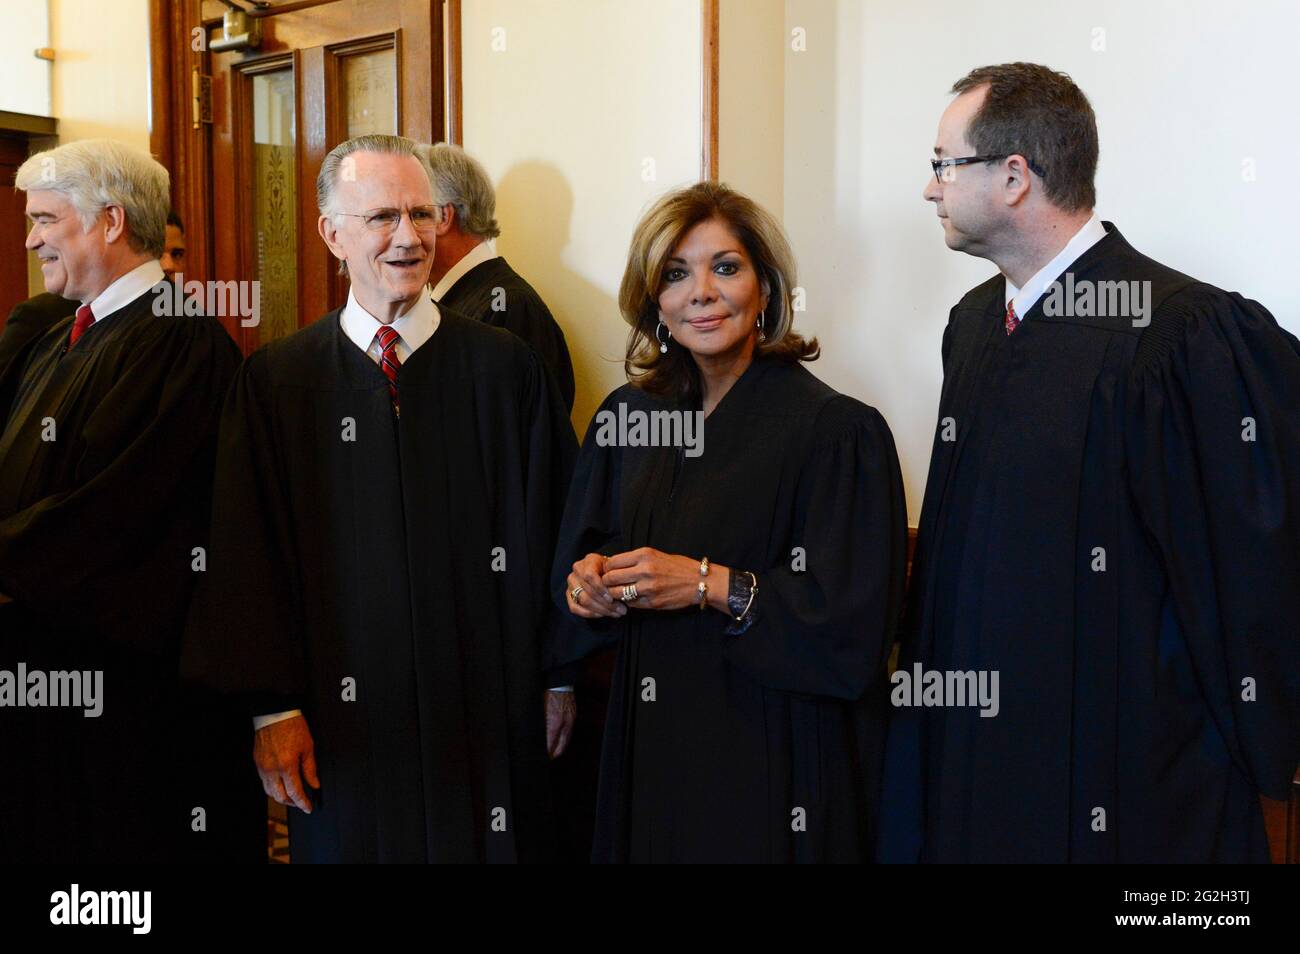 Texas Supreme Court Justice Eva Guzman is shown at the State of the